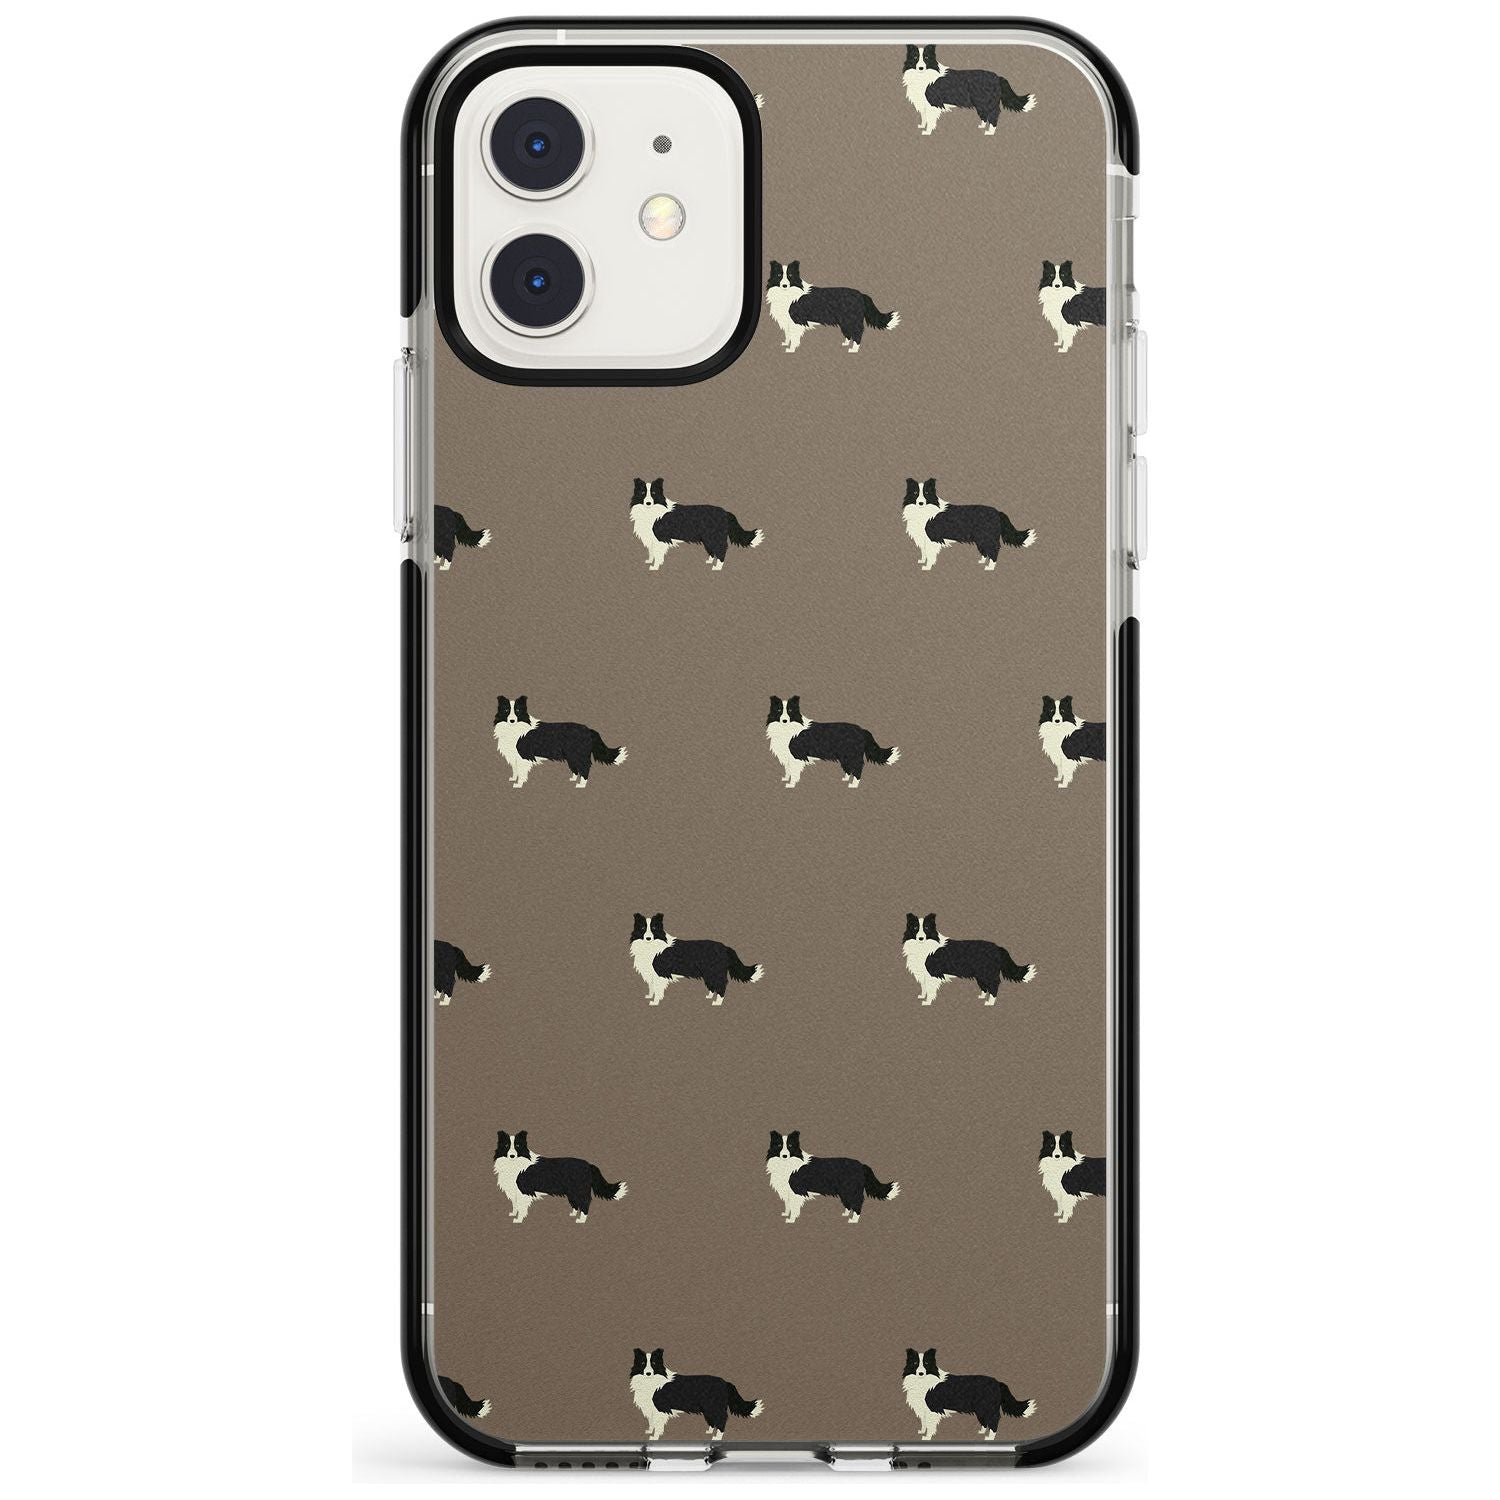 Border Collie Dog Pattern Black Impact Phone Case for iPhone 11